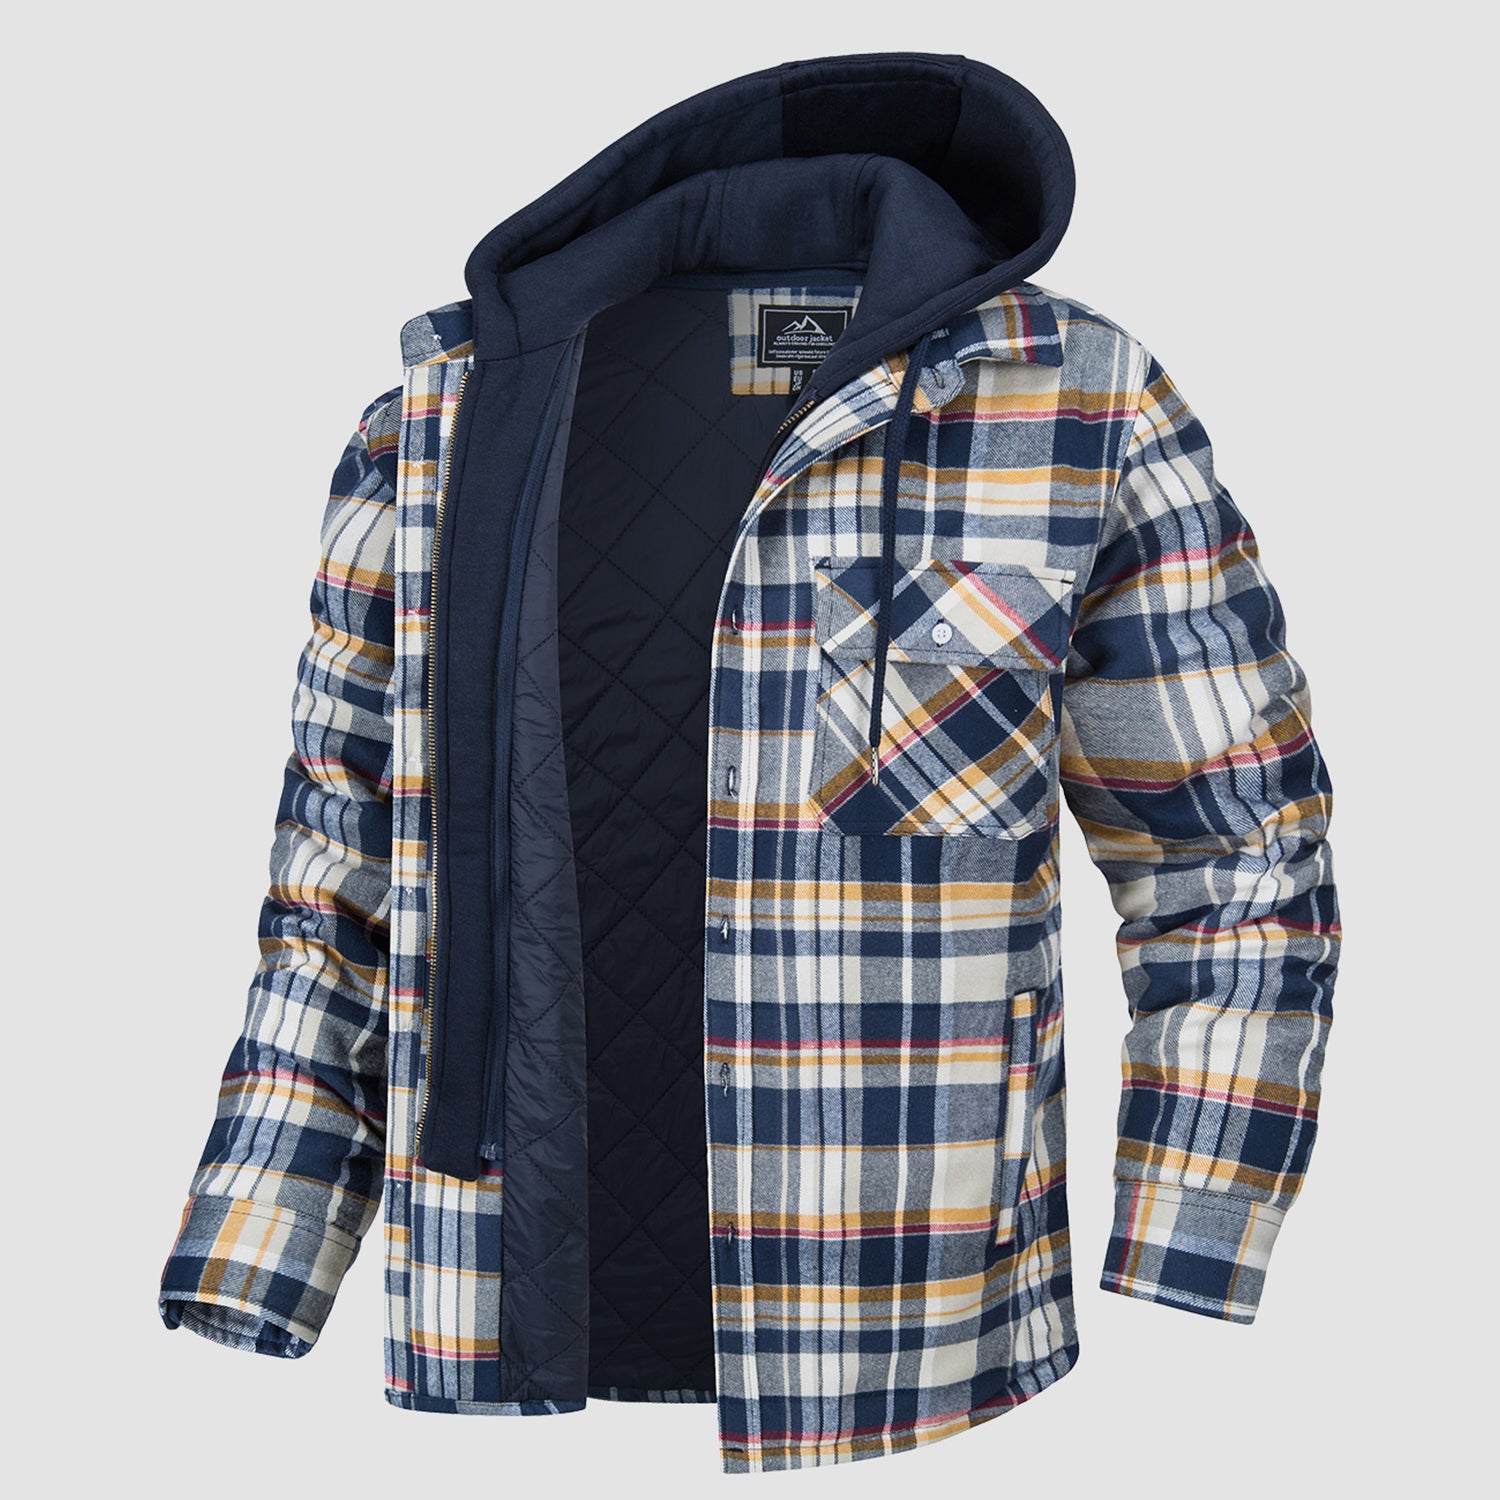 Men's Flannel Shirt Jacket with Removable Hood 5 Pockets Plaid Quilted ...